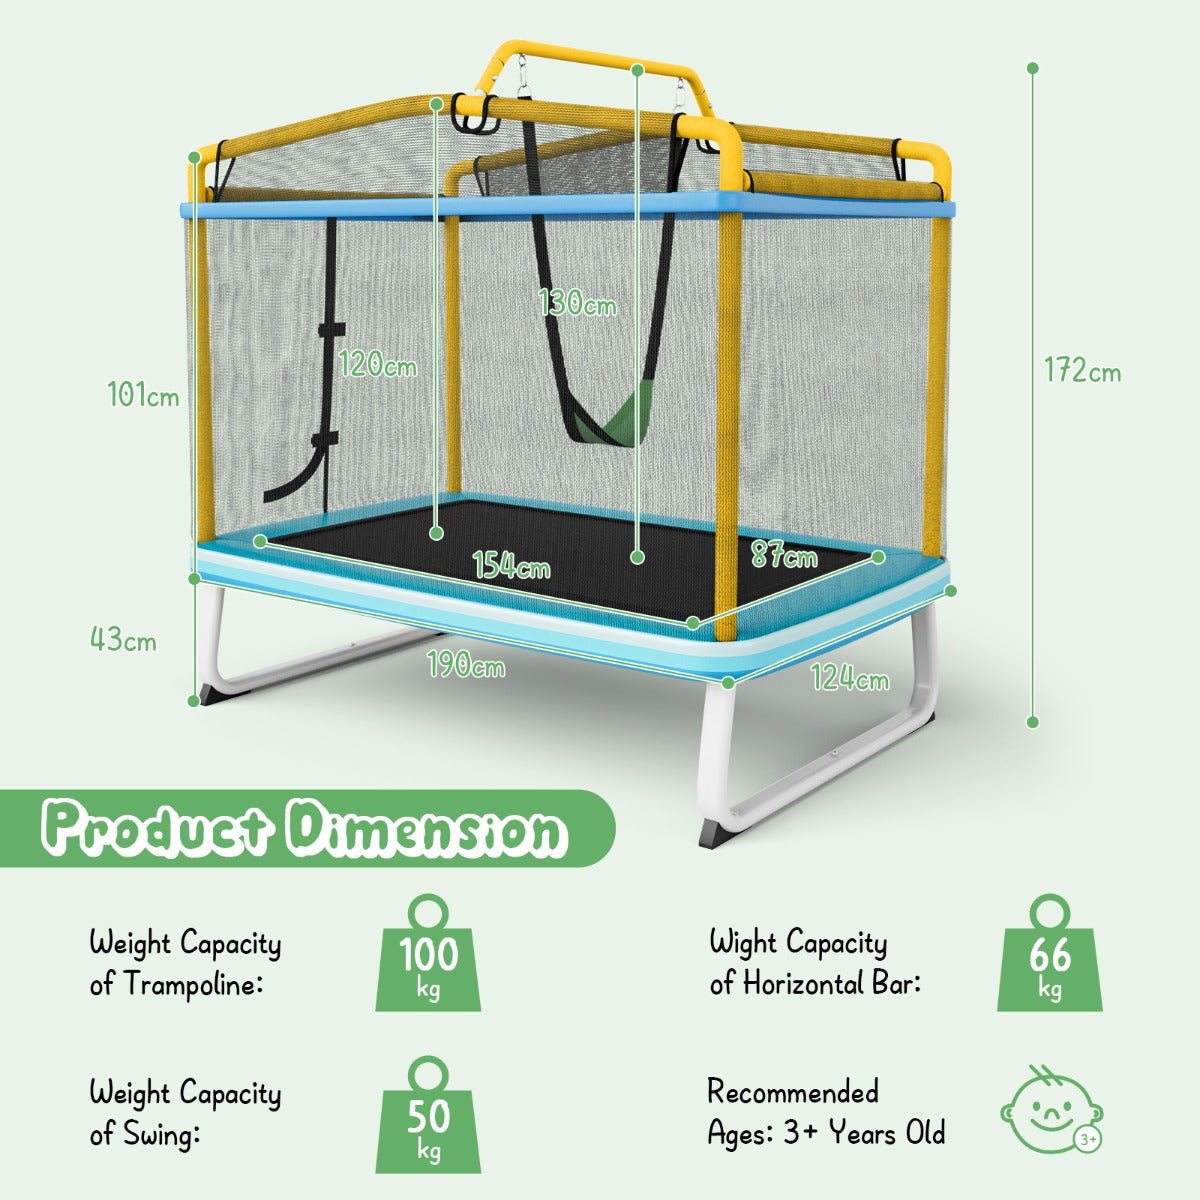 Ultimate Active Fun: 3-in-1 Rectangle Trampoline with Swing & Horizontal Bar Yellow